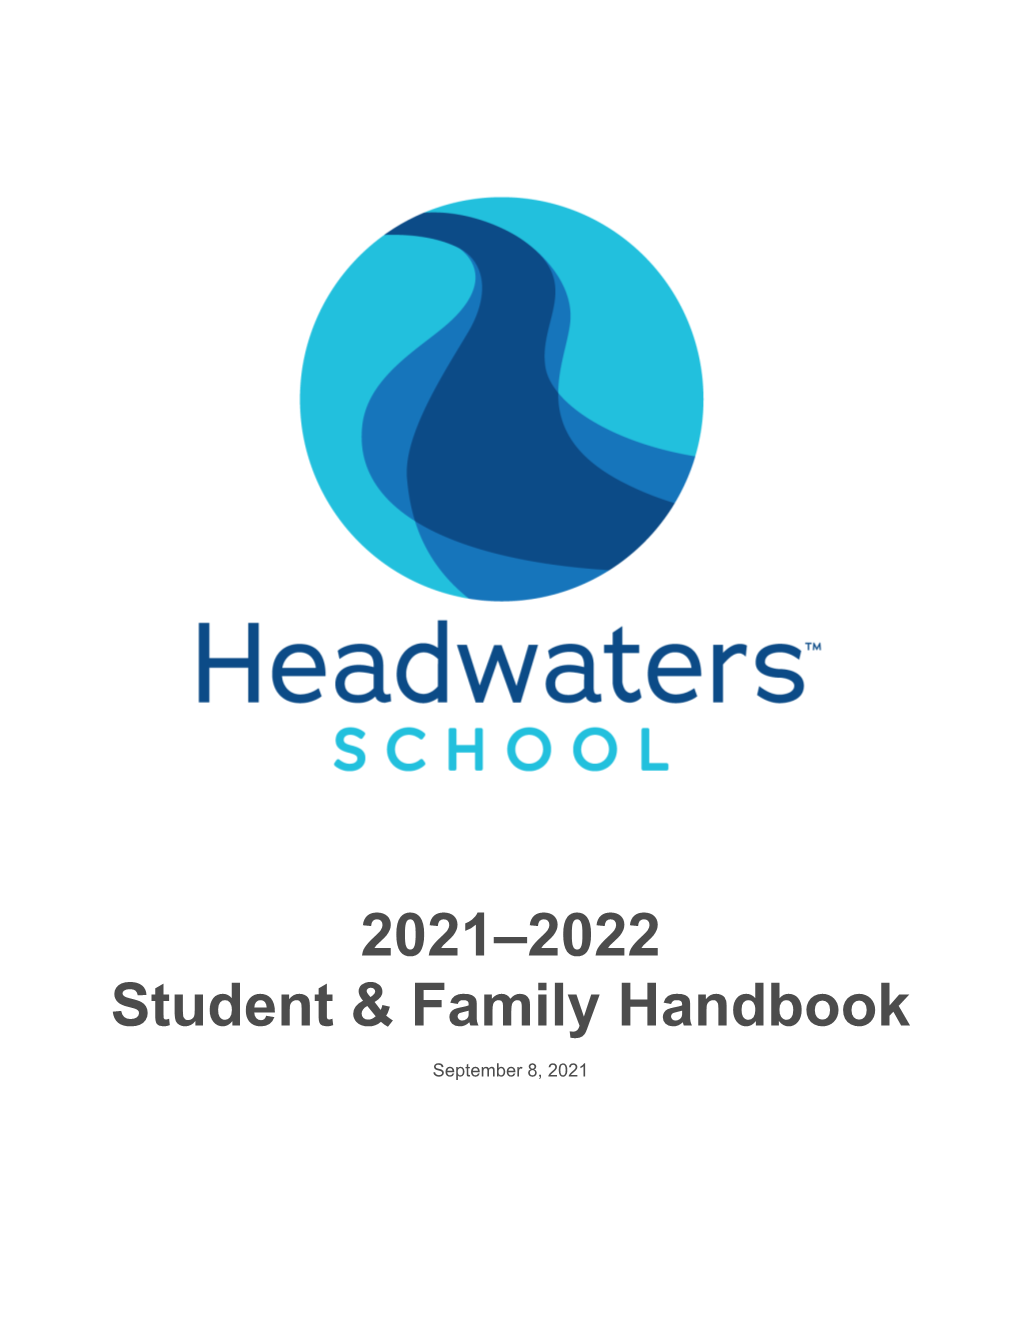 Headwaters School Student & Family Handbook for the 2021-2022